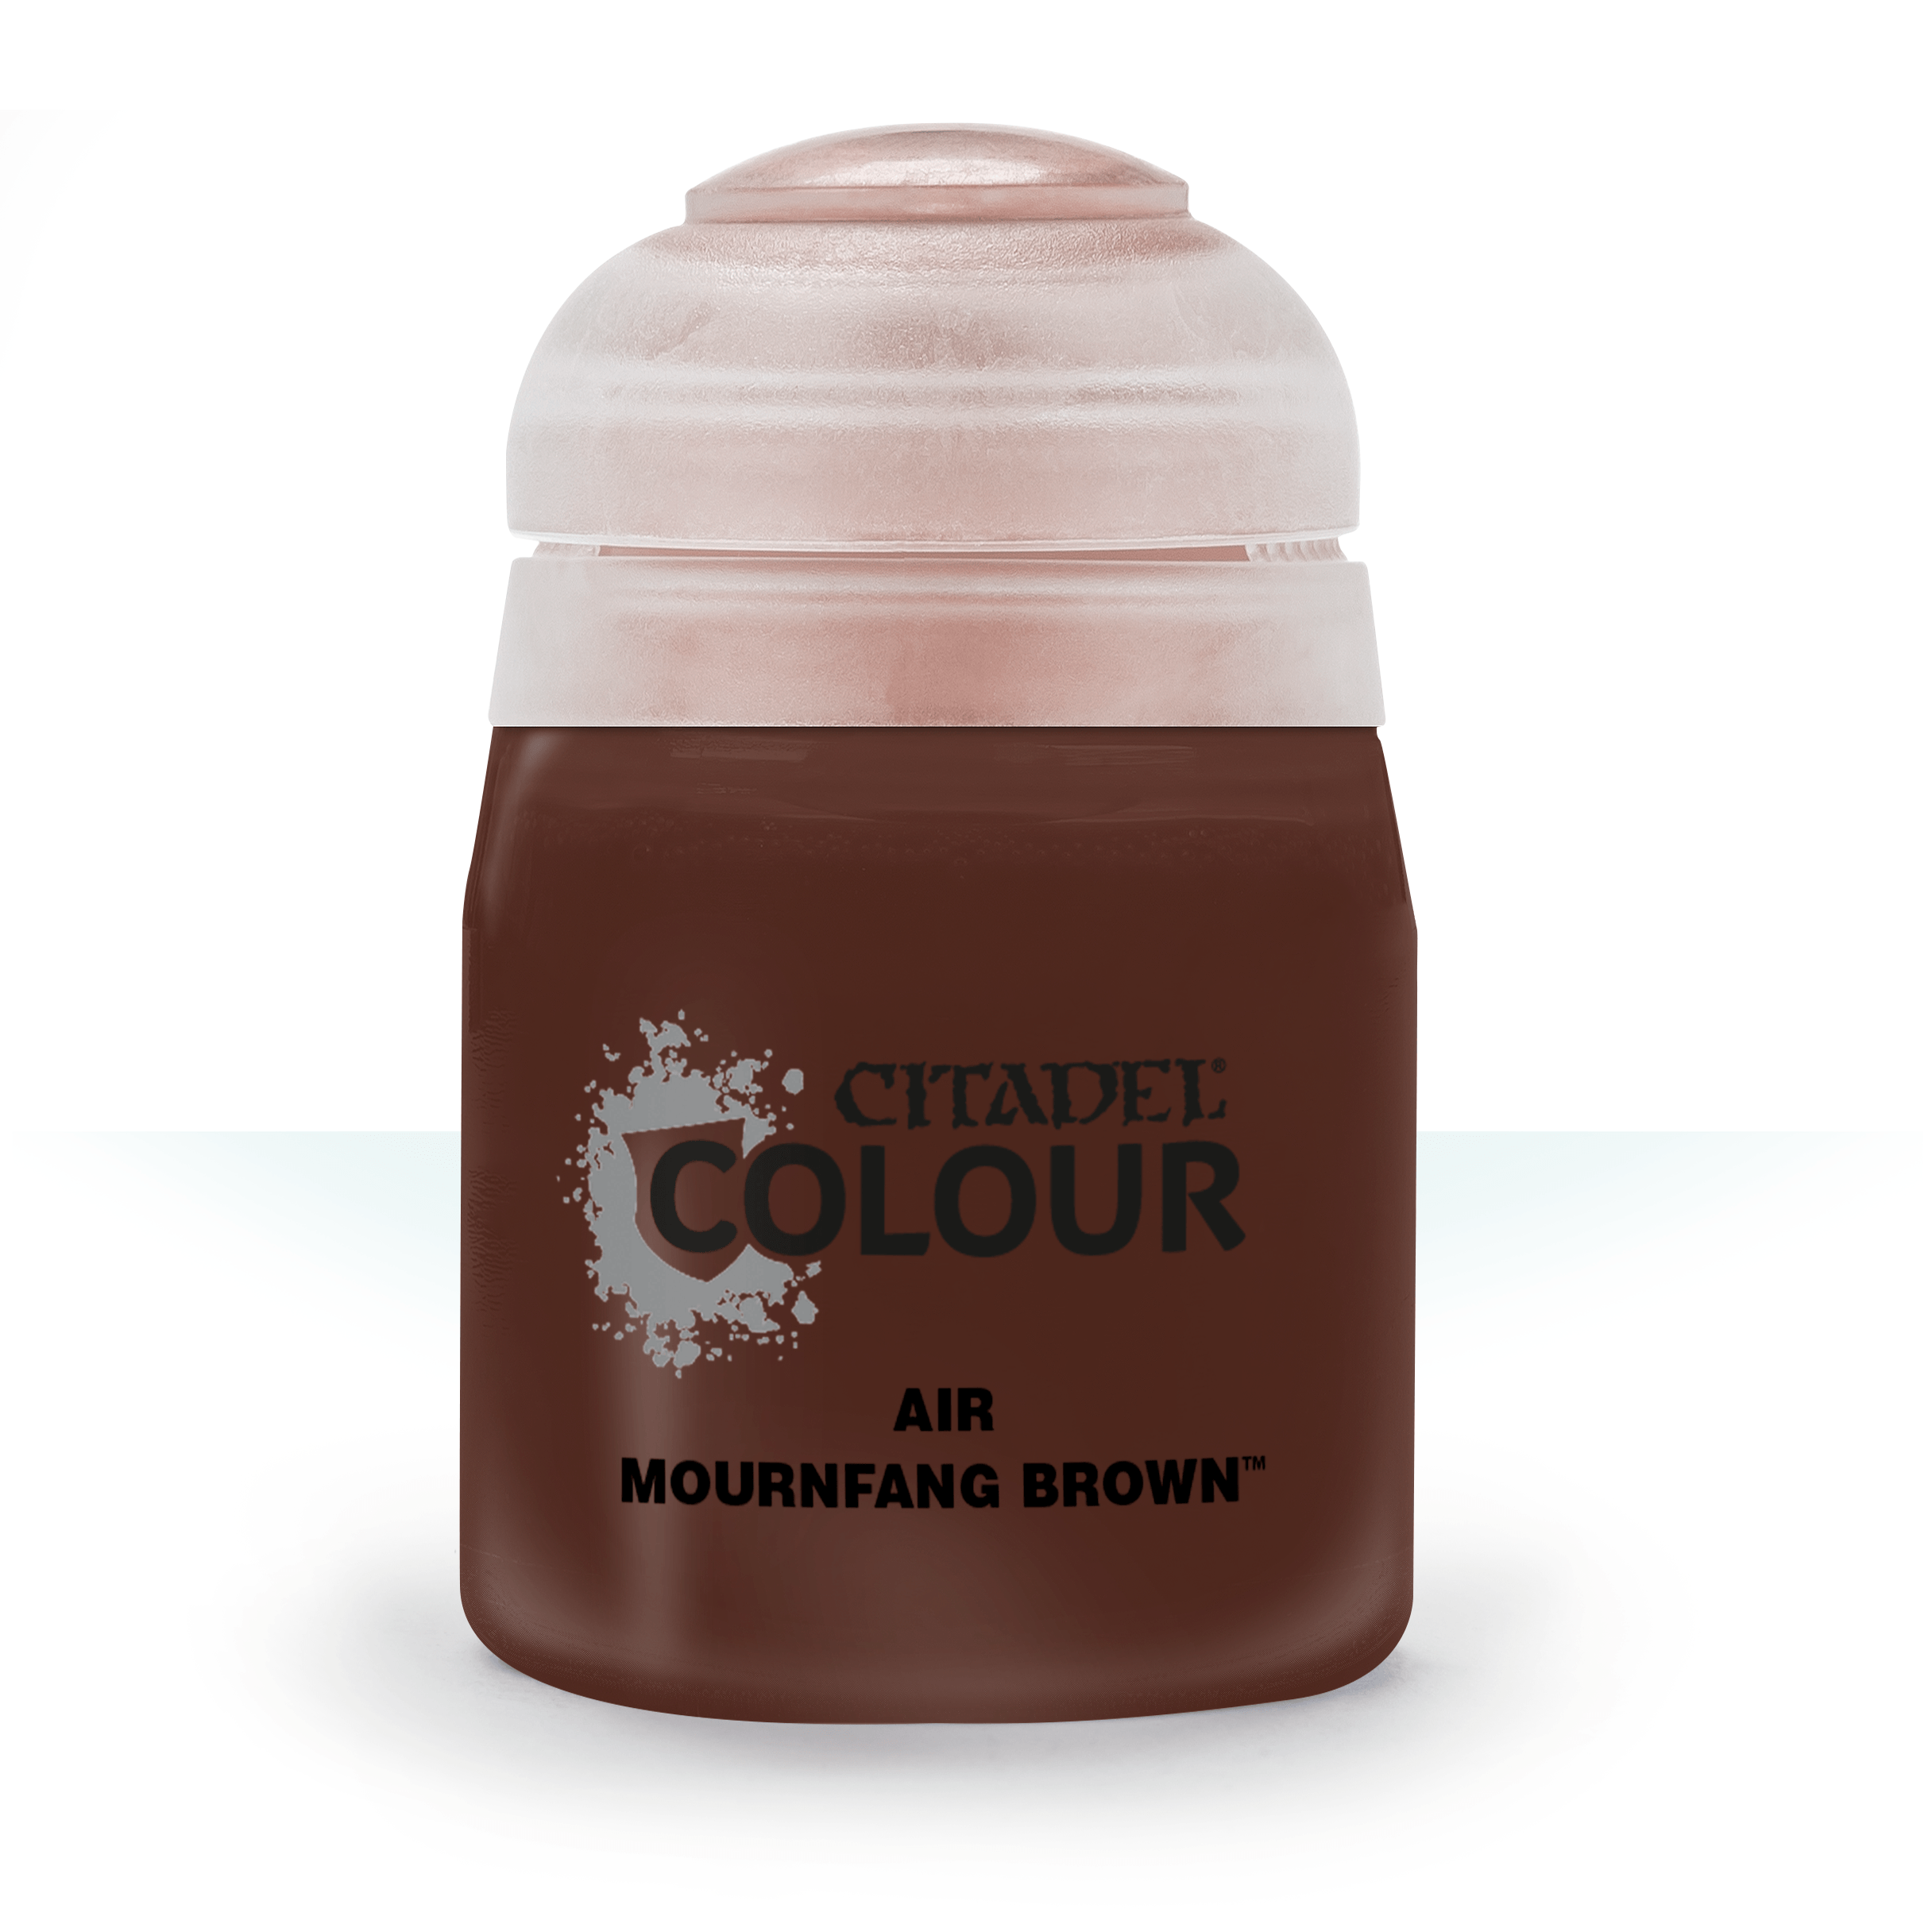 Air Mournfang Brown - Citadel Colour - 24 ml